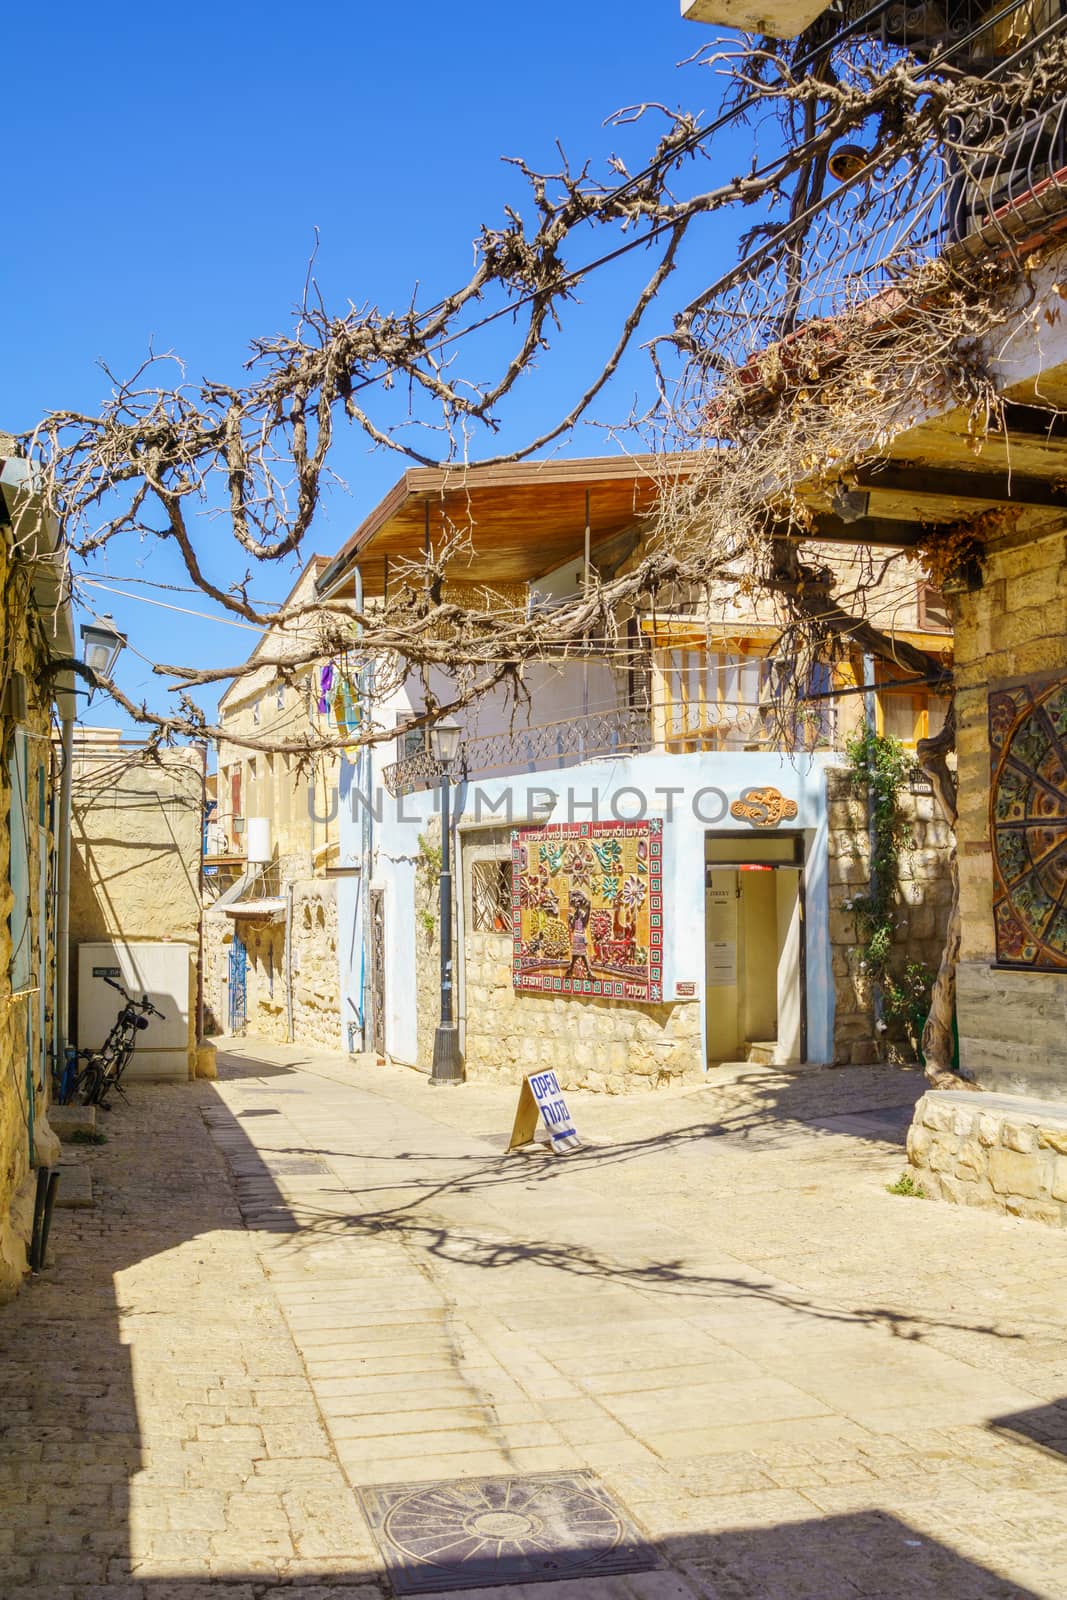 SAFED, ISRAEL - SEPTEMBER 18, 2015: An alley in the artist quarter, with local galleries and other businesses, in Safed, Israel